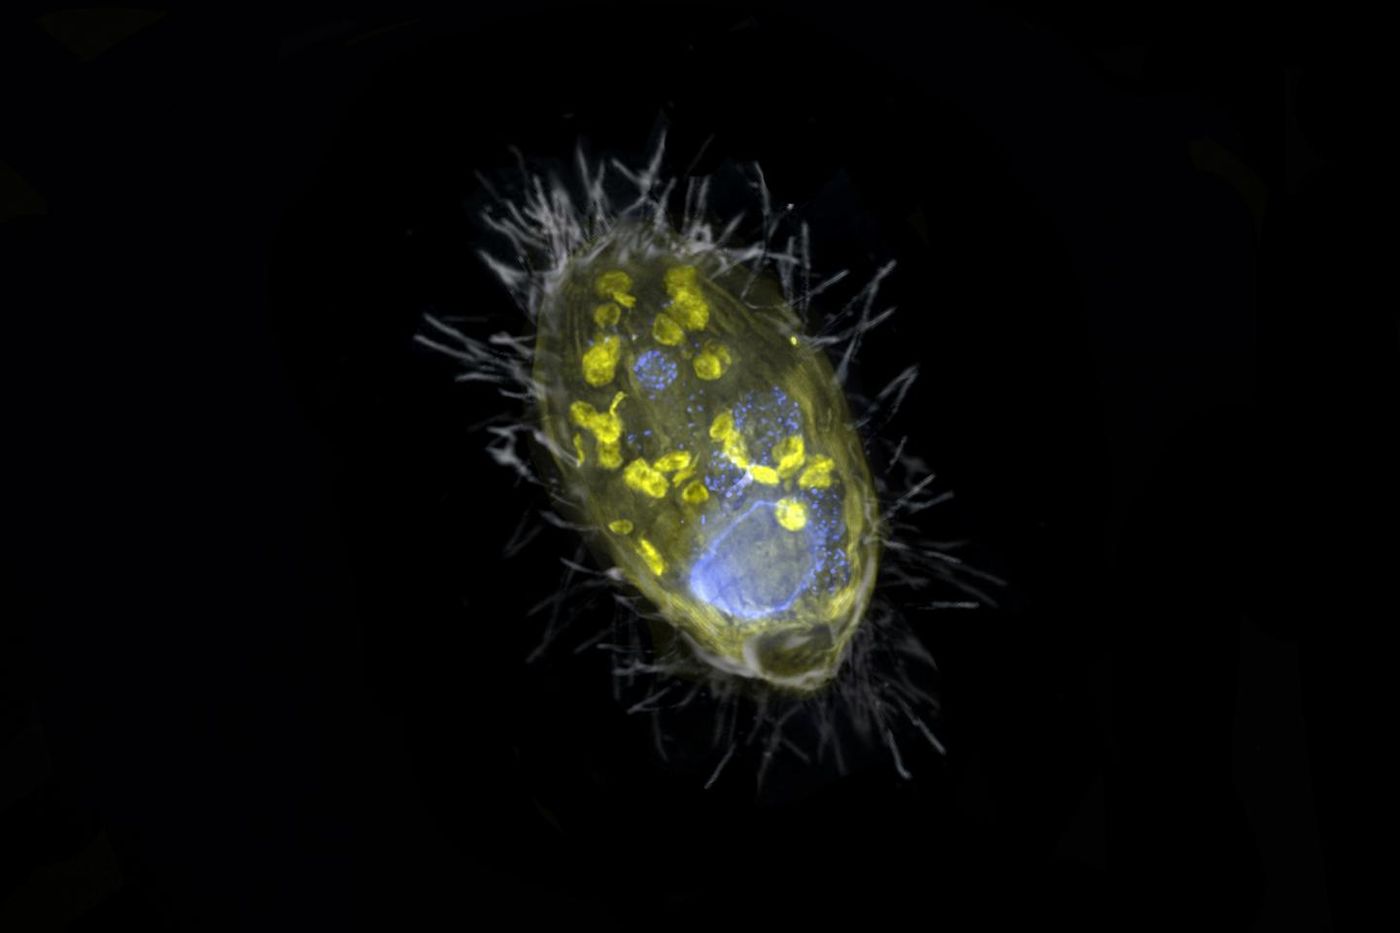 The 'Candidatus Azoamicus ciliaticola' endosymbiont (yellow), large nucleus (blue) and bacterial prey in food vacuoles. The outer structure of the fluorescent ciliate and the cilia are also visible in this merge of a grey scanning electron microscope image and fluorescence images. / Credit: Max Planck Institute for Marine Microbiology, S. Ahmerkamp